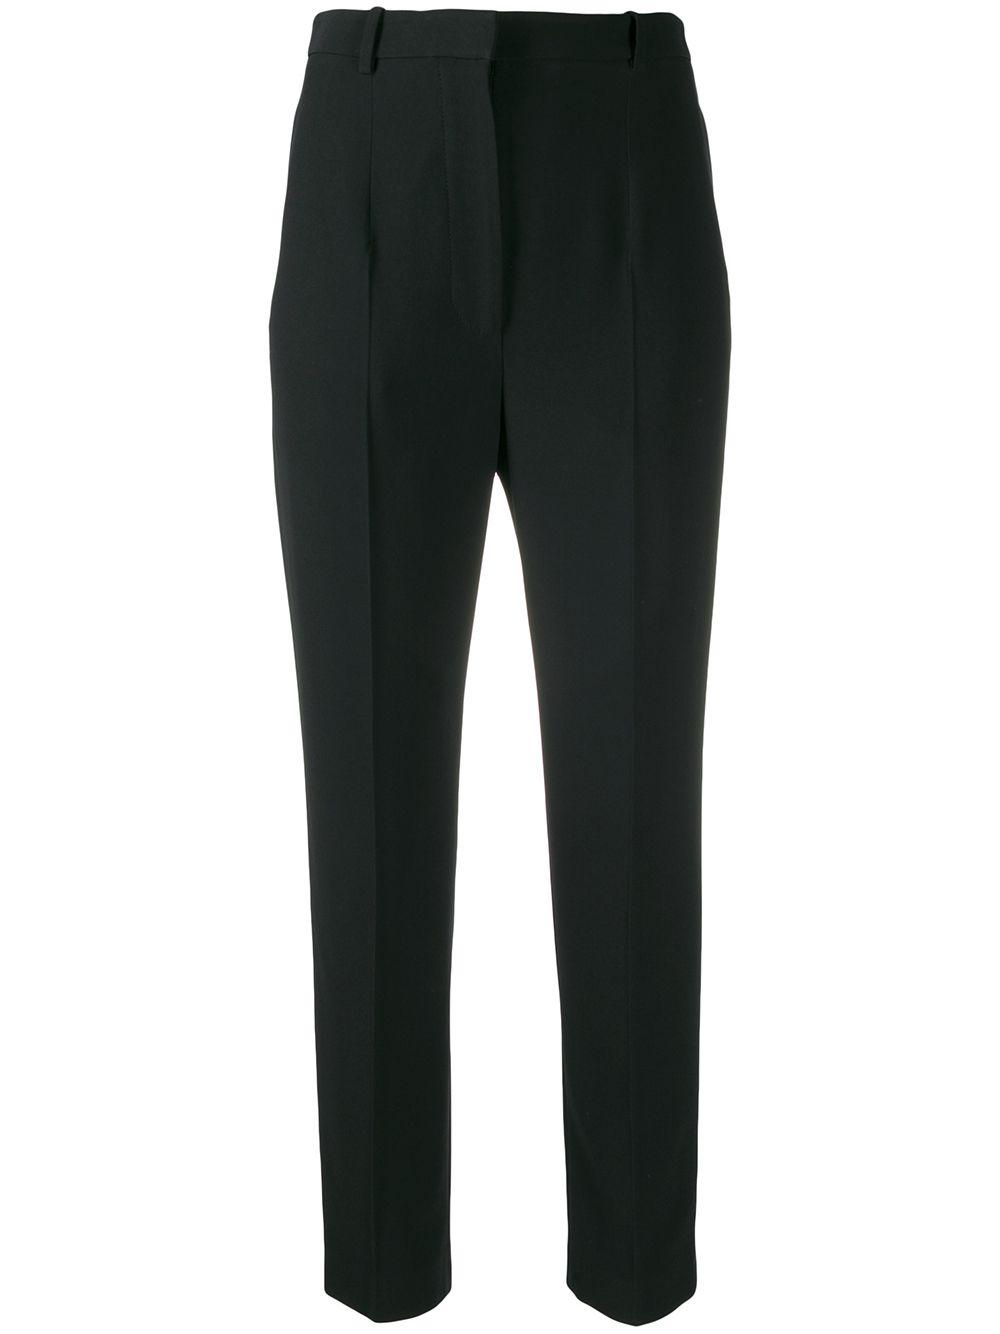 high-waisted tailored trousers by ALEXANDER MCQUEEN